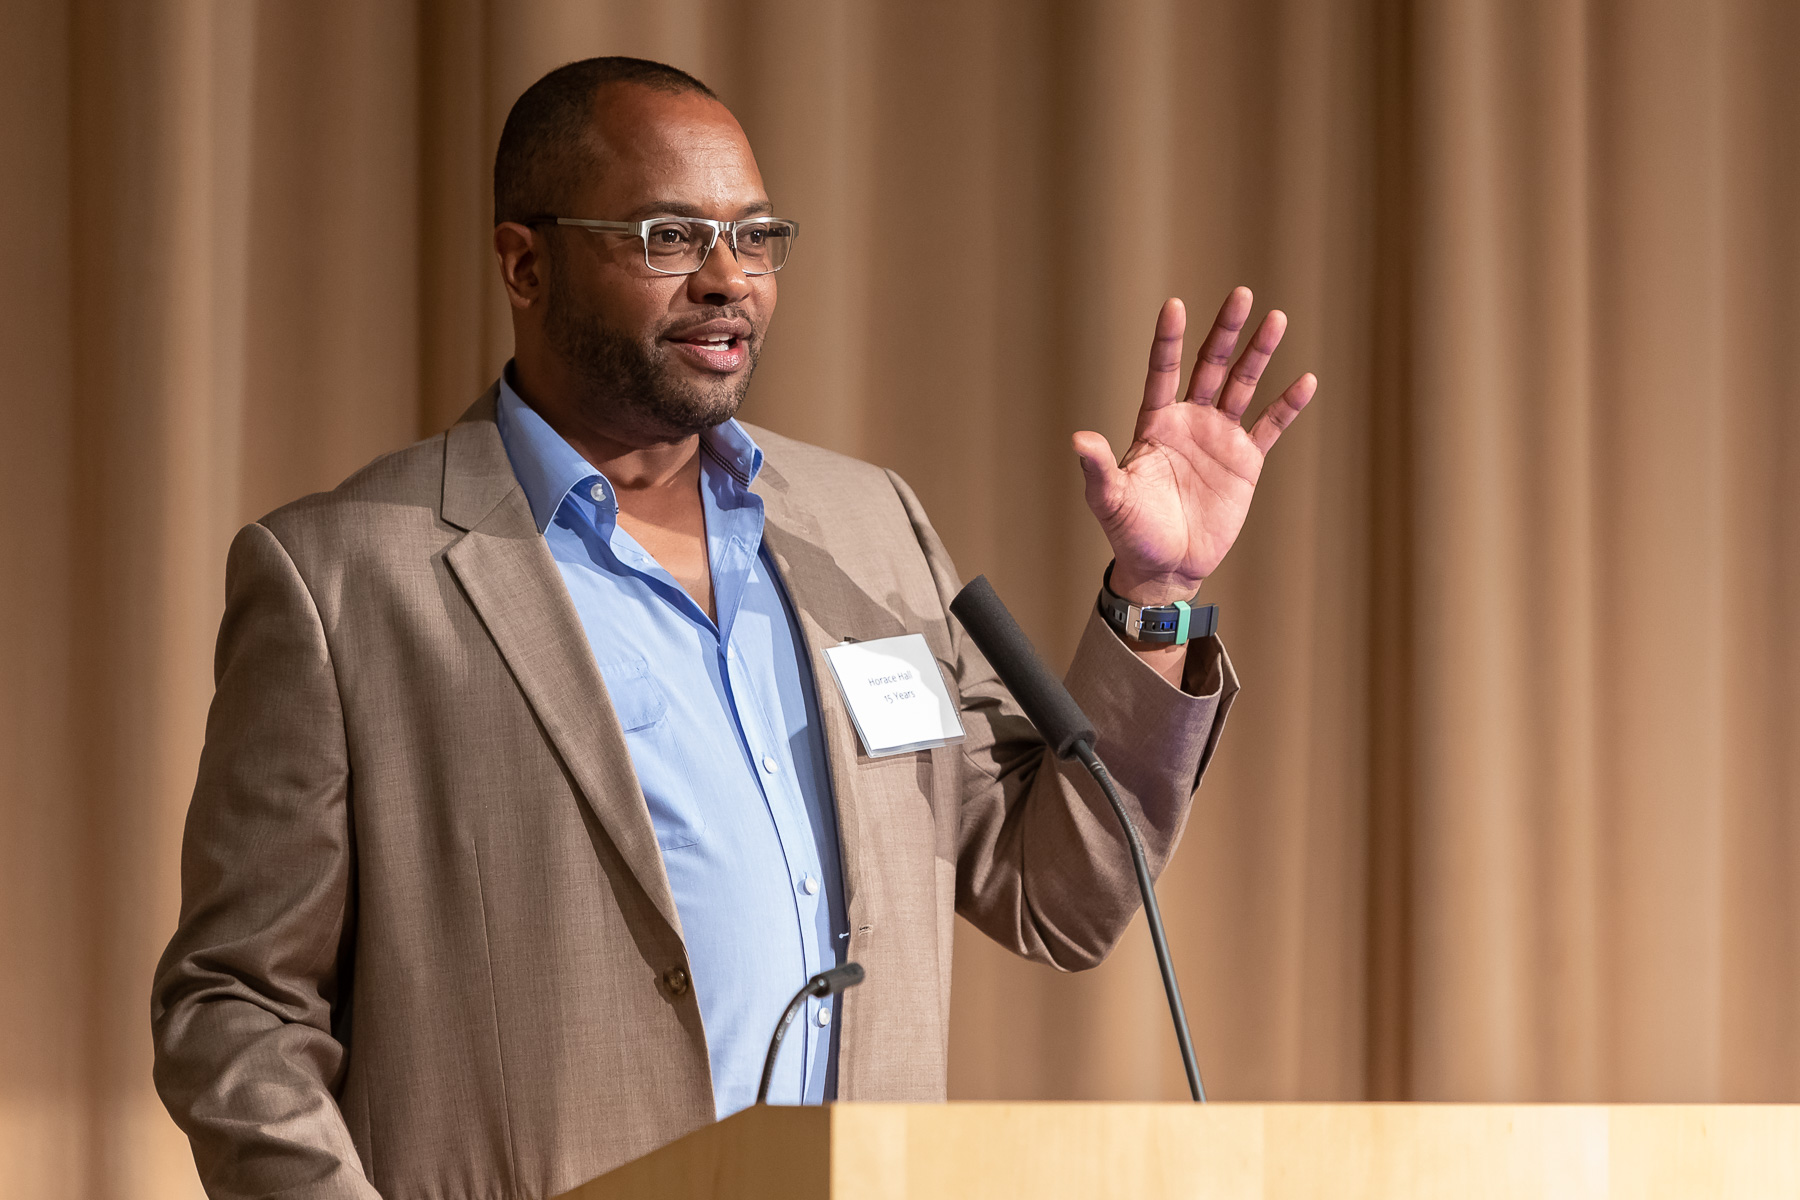 Horace Hall, associate professor of policy studies and research in the College of Education, reflects on his 15 years at DePaul during the annual Distinguished Service Awards luncheon. (DePaul University/Jeff Carrion)